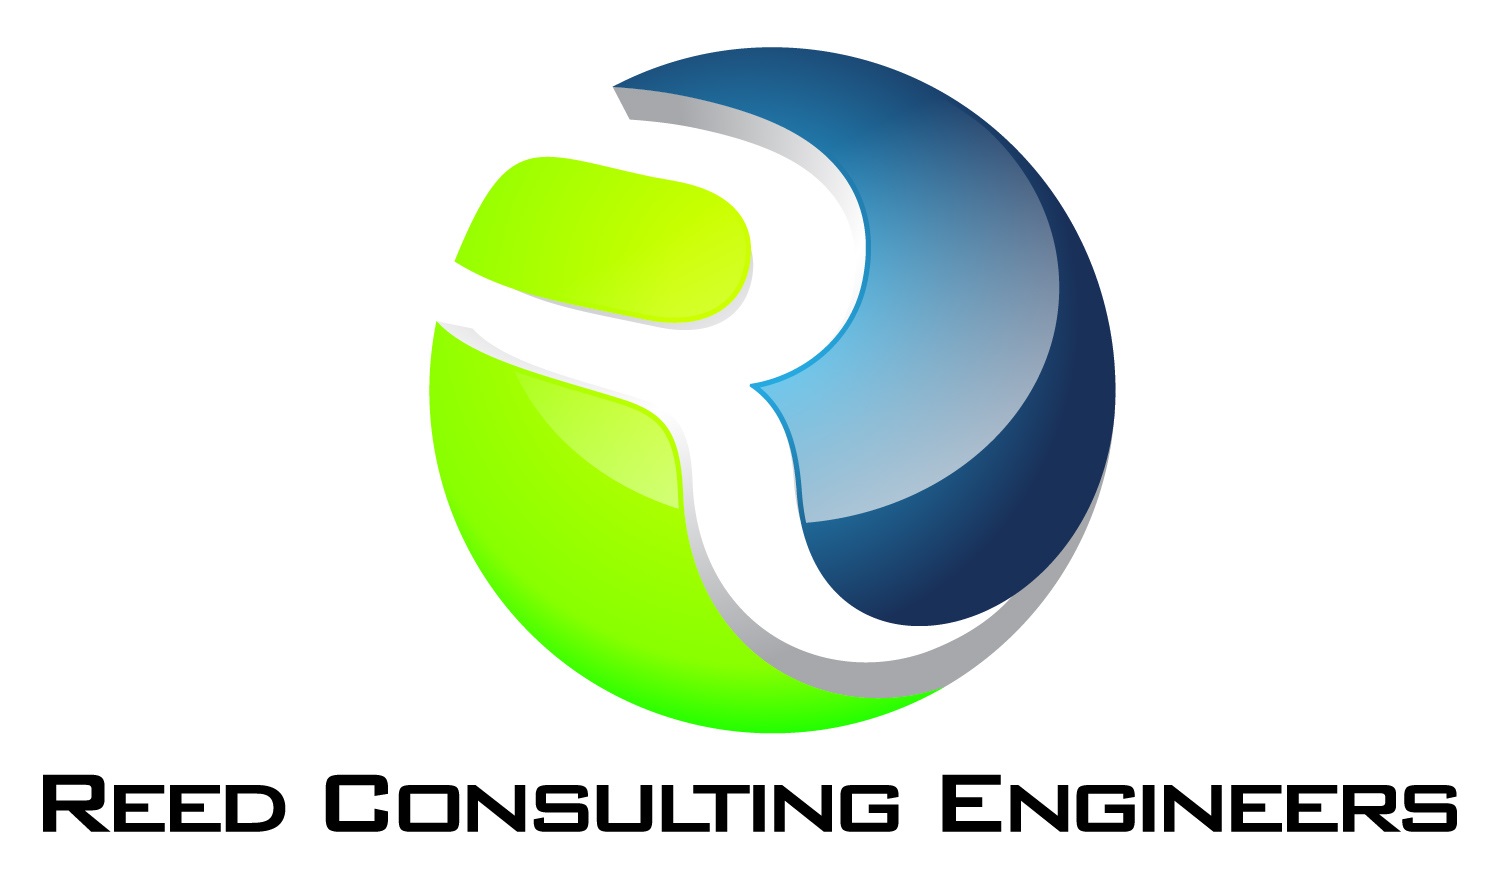 Reed Consulting Engineers